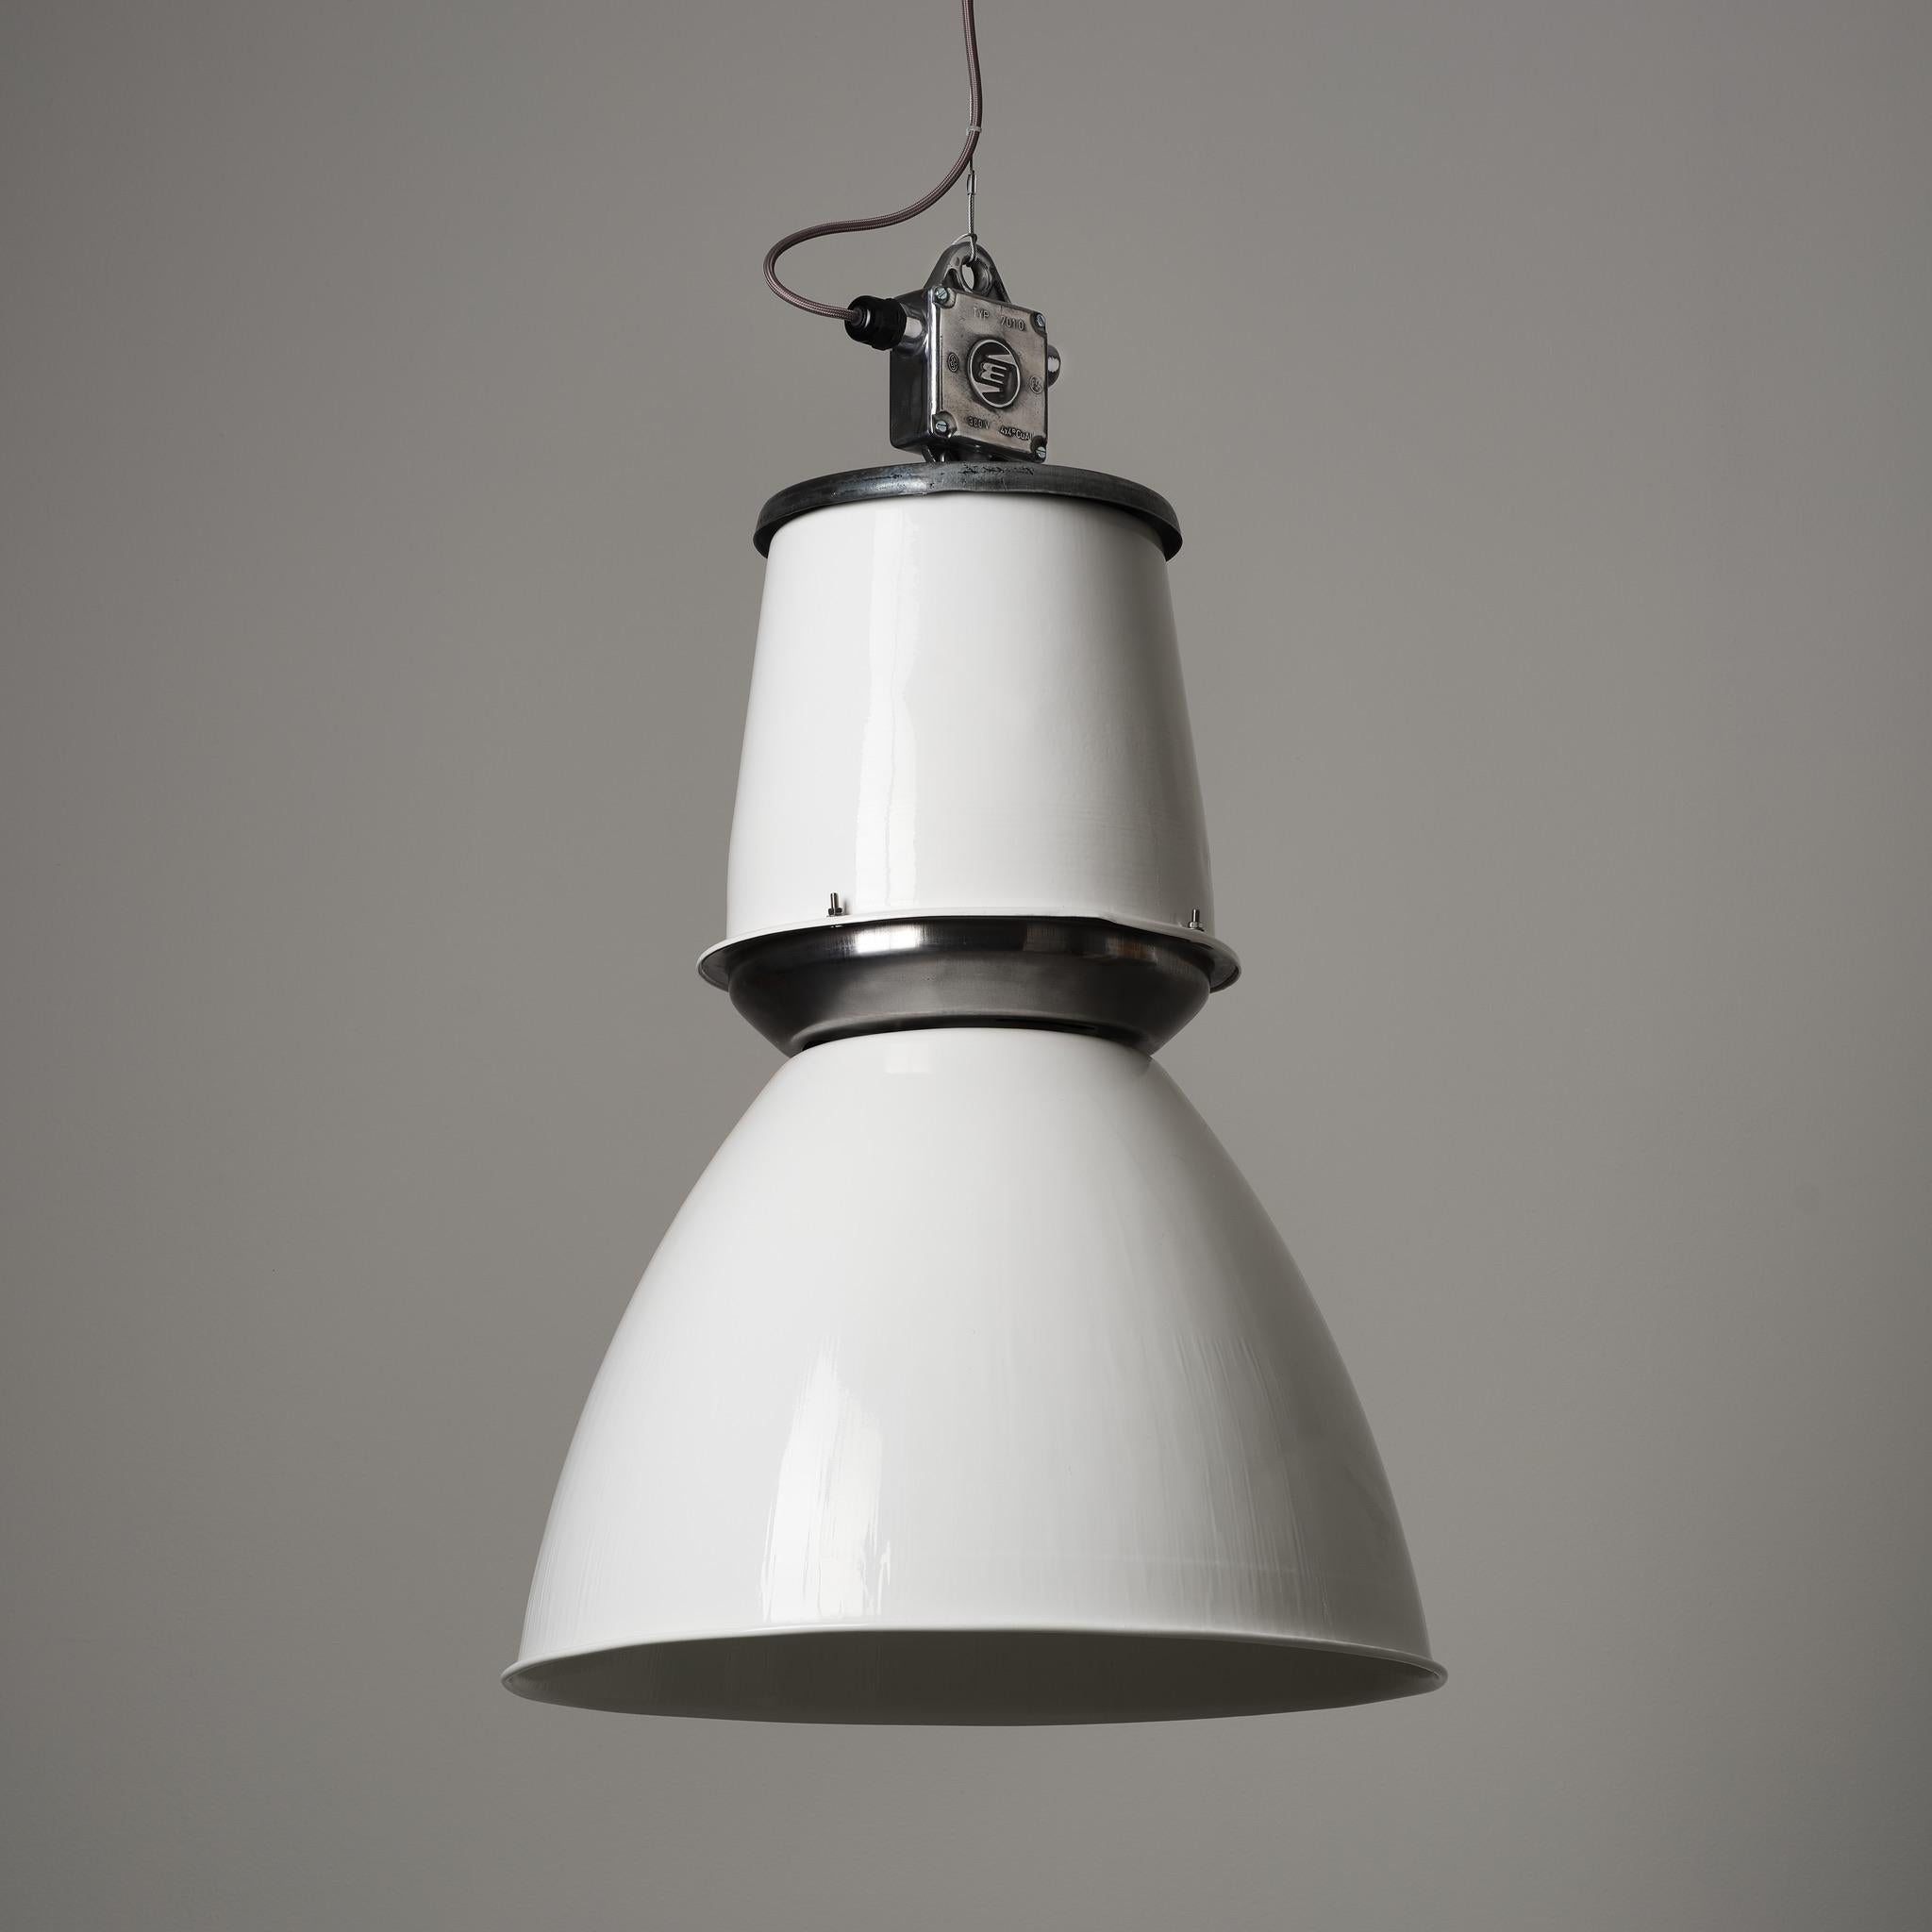 Enameled Vintage Giant Czech Pendant Light - Reconditioned Black/ Grey/ White For Sale